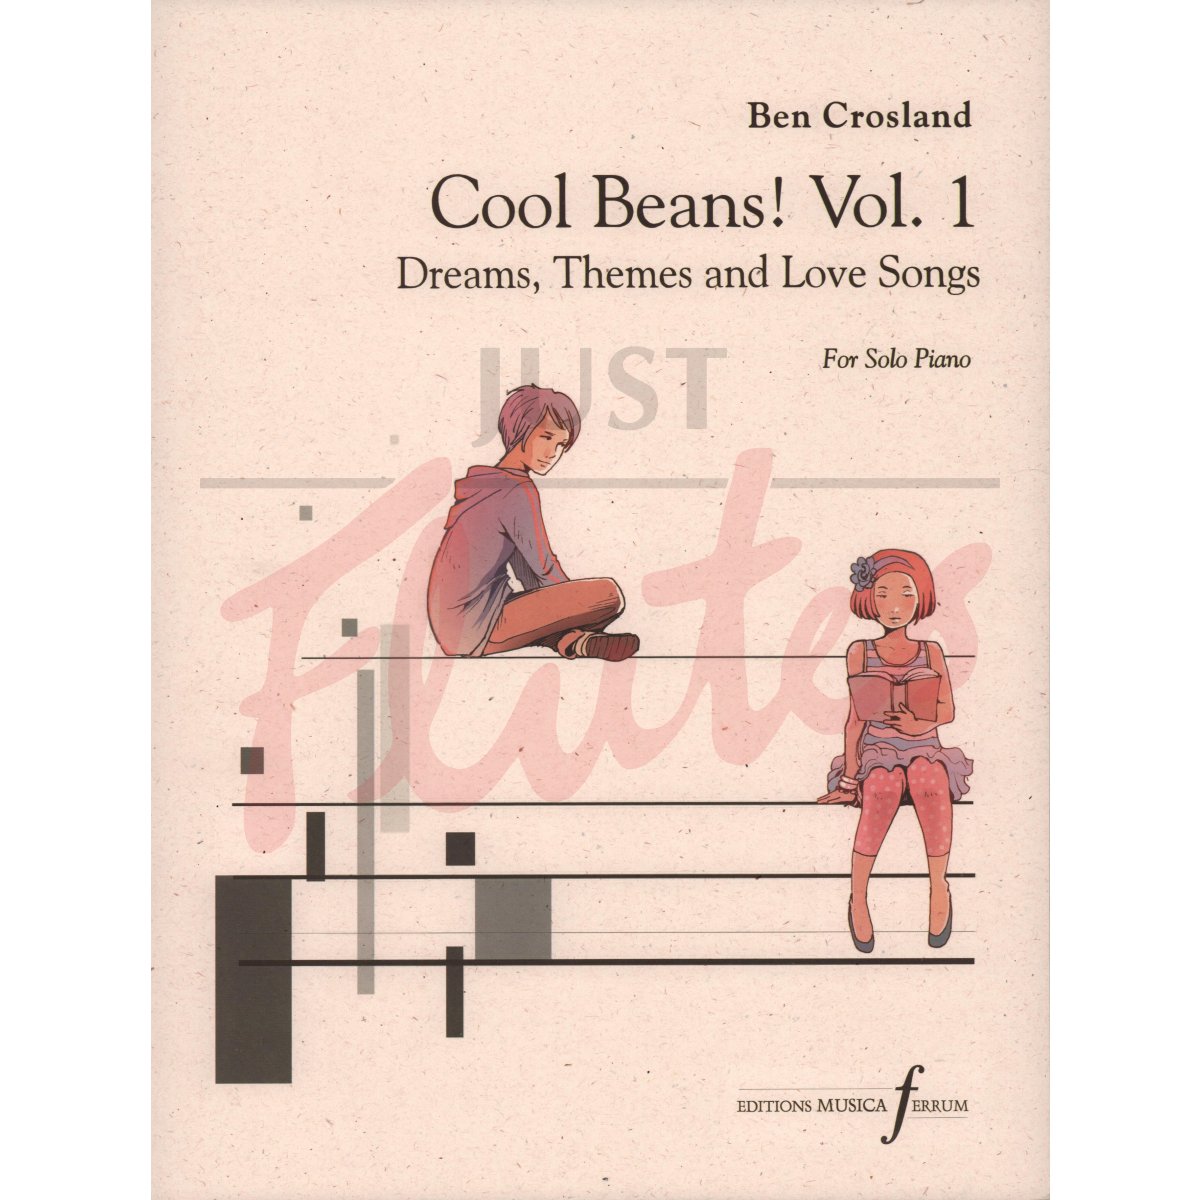 Cool Beans! Vol 1: Dreams, Themes and Love Songs for Solo Piano